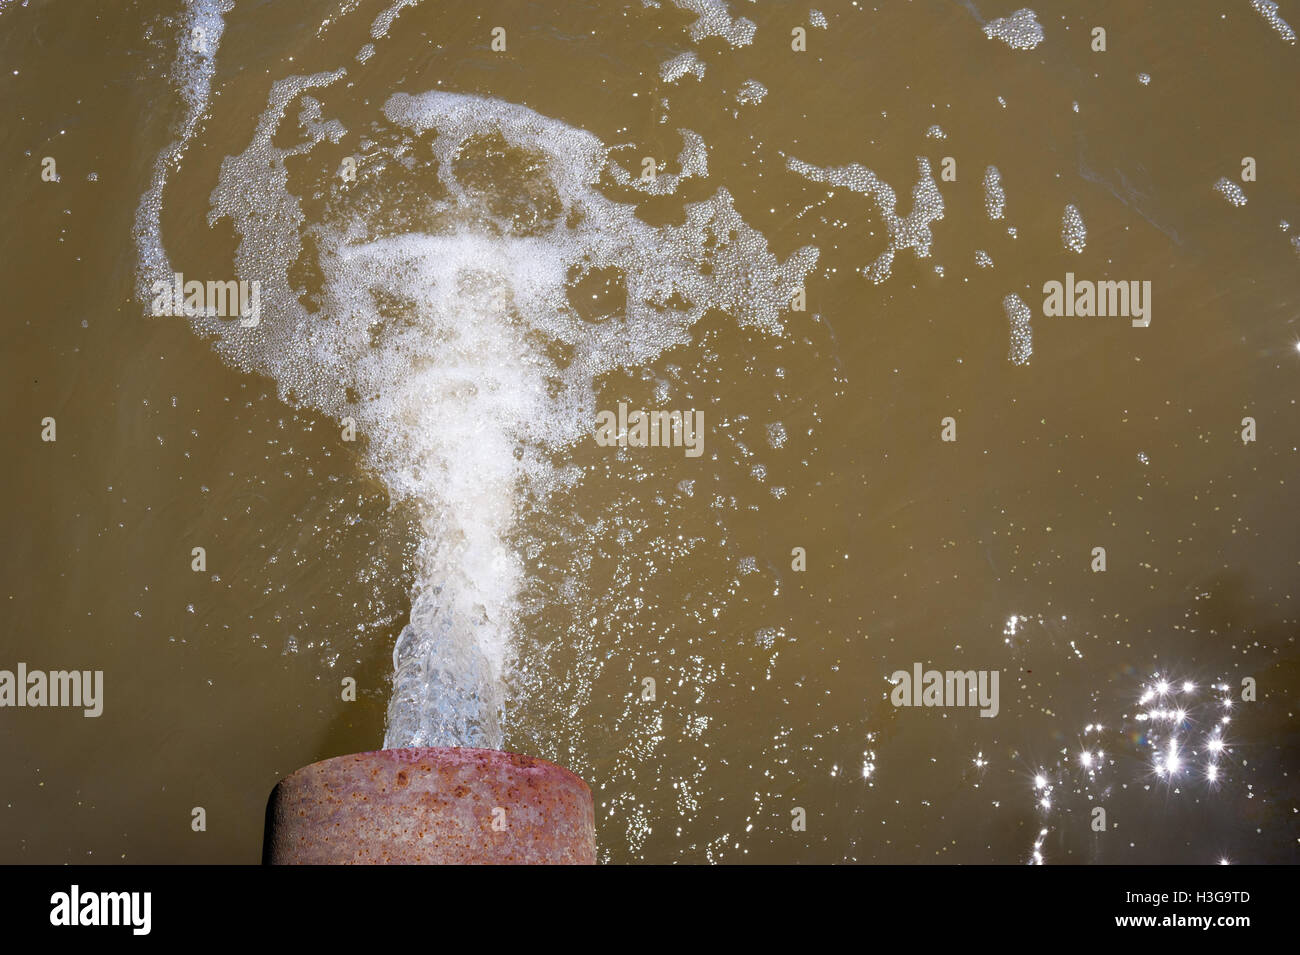 Water flowing from rusted metal culvert drain pipe opening and splashing into foamy brown water, viewed from above. Stock Photo